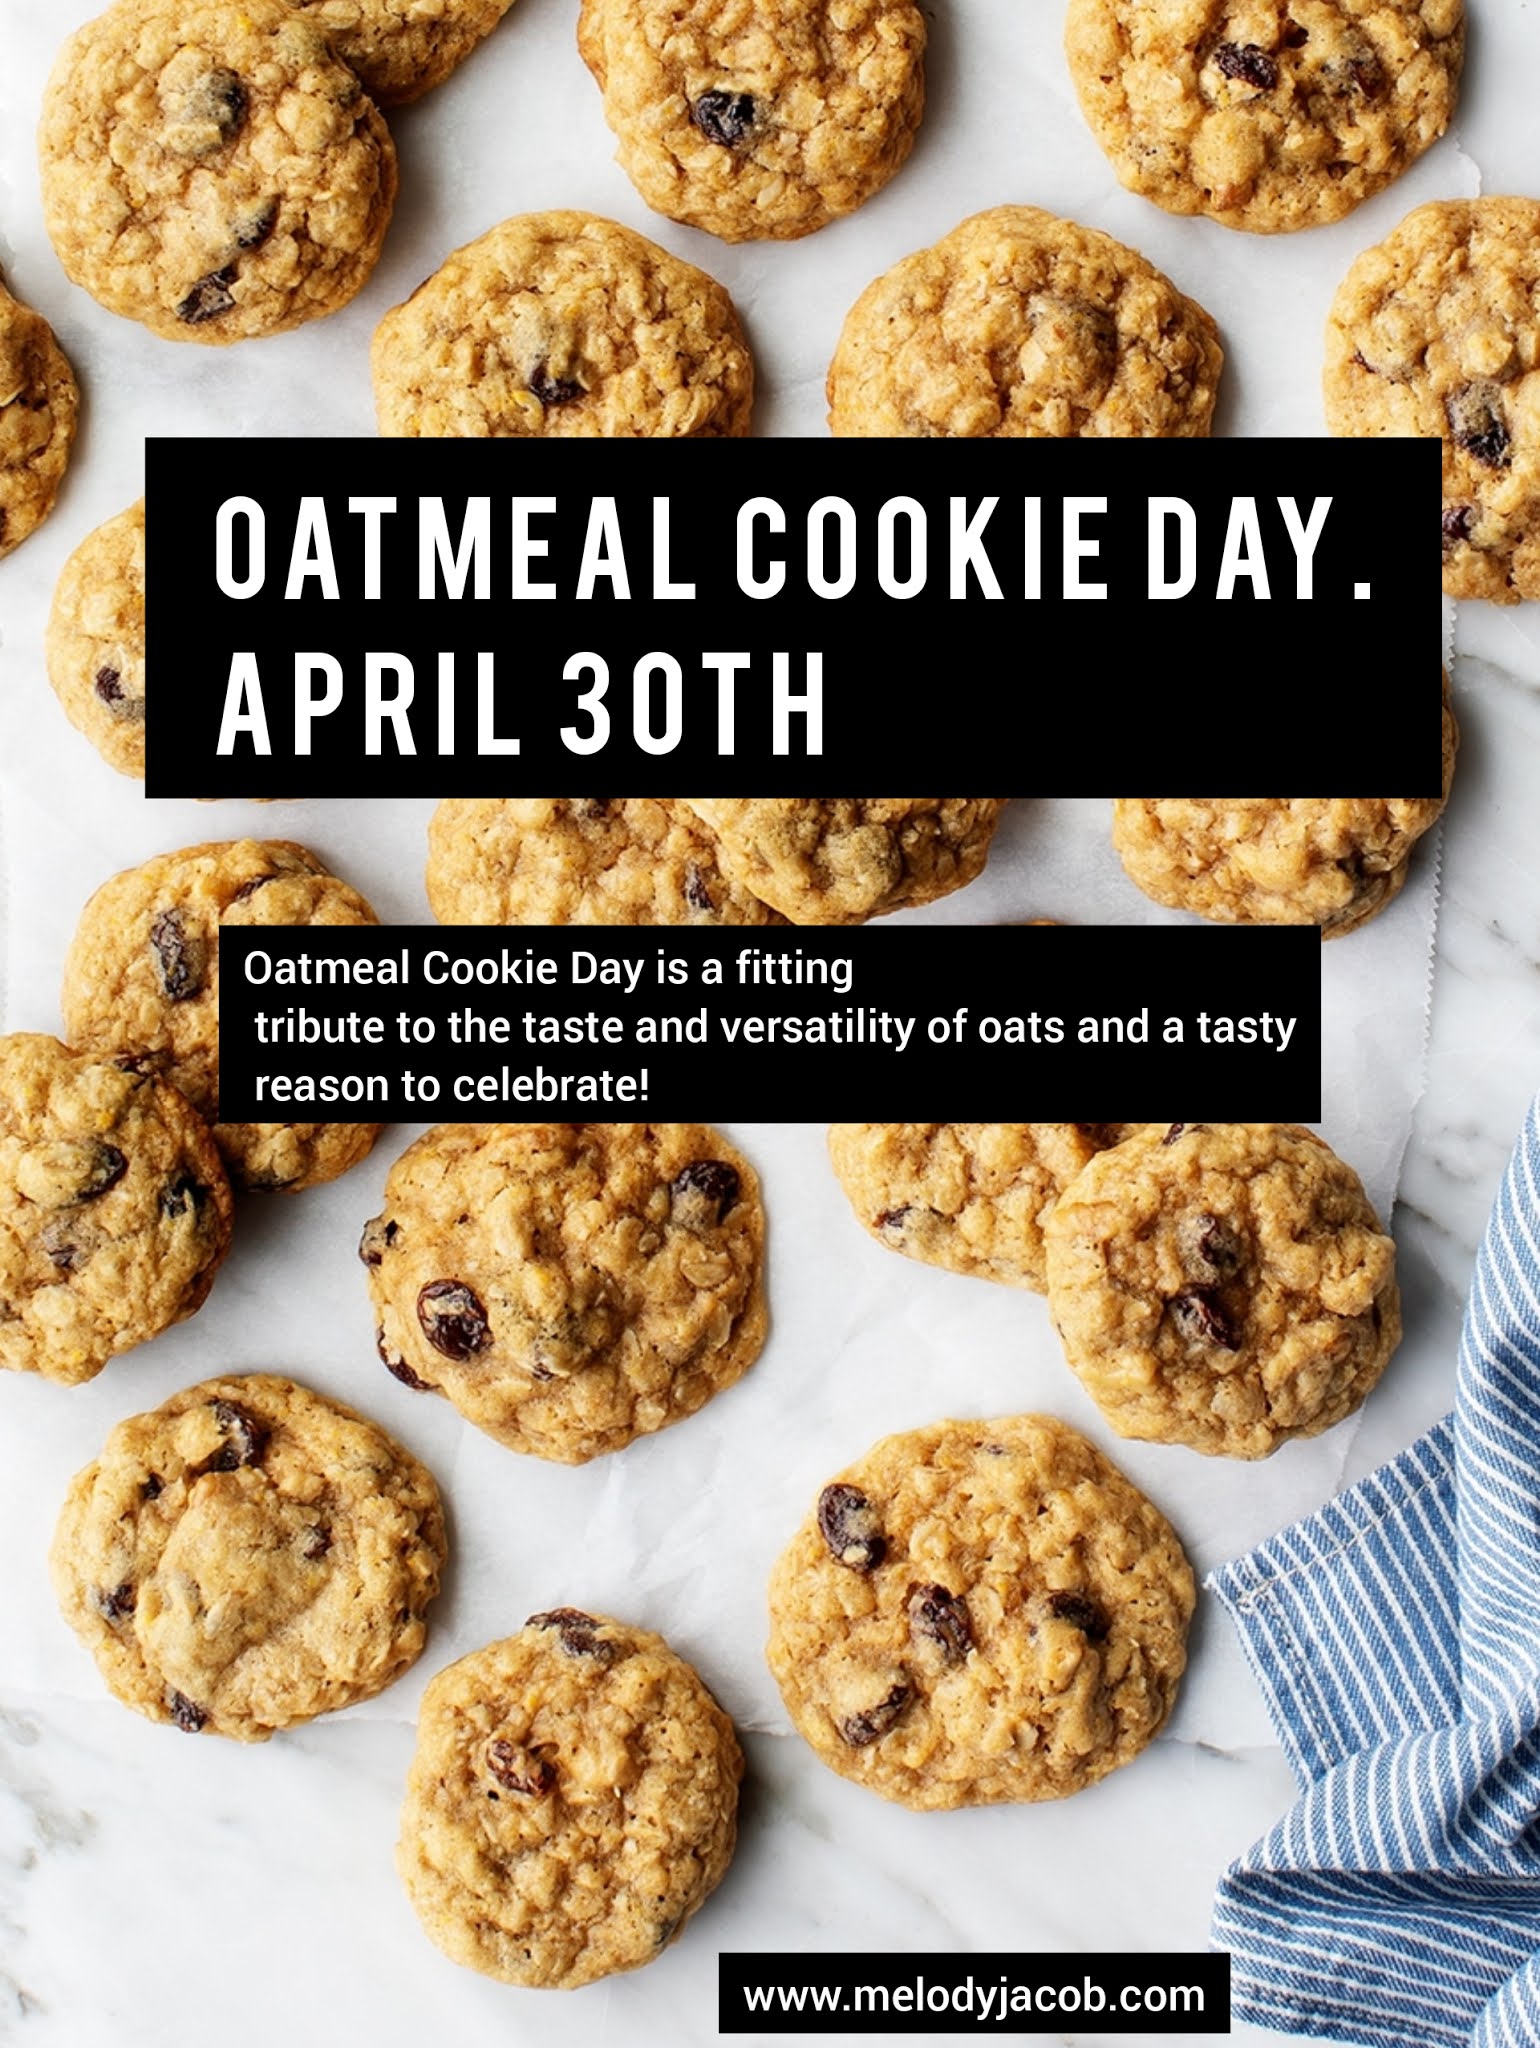 Oatmeal Cookie Day, April 30th.